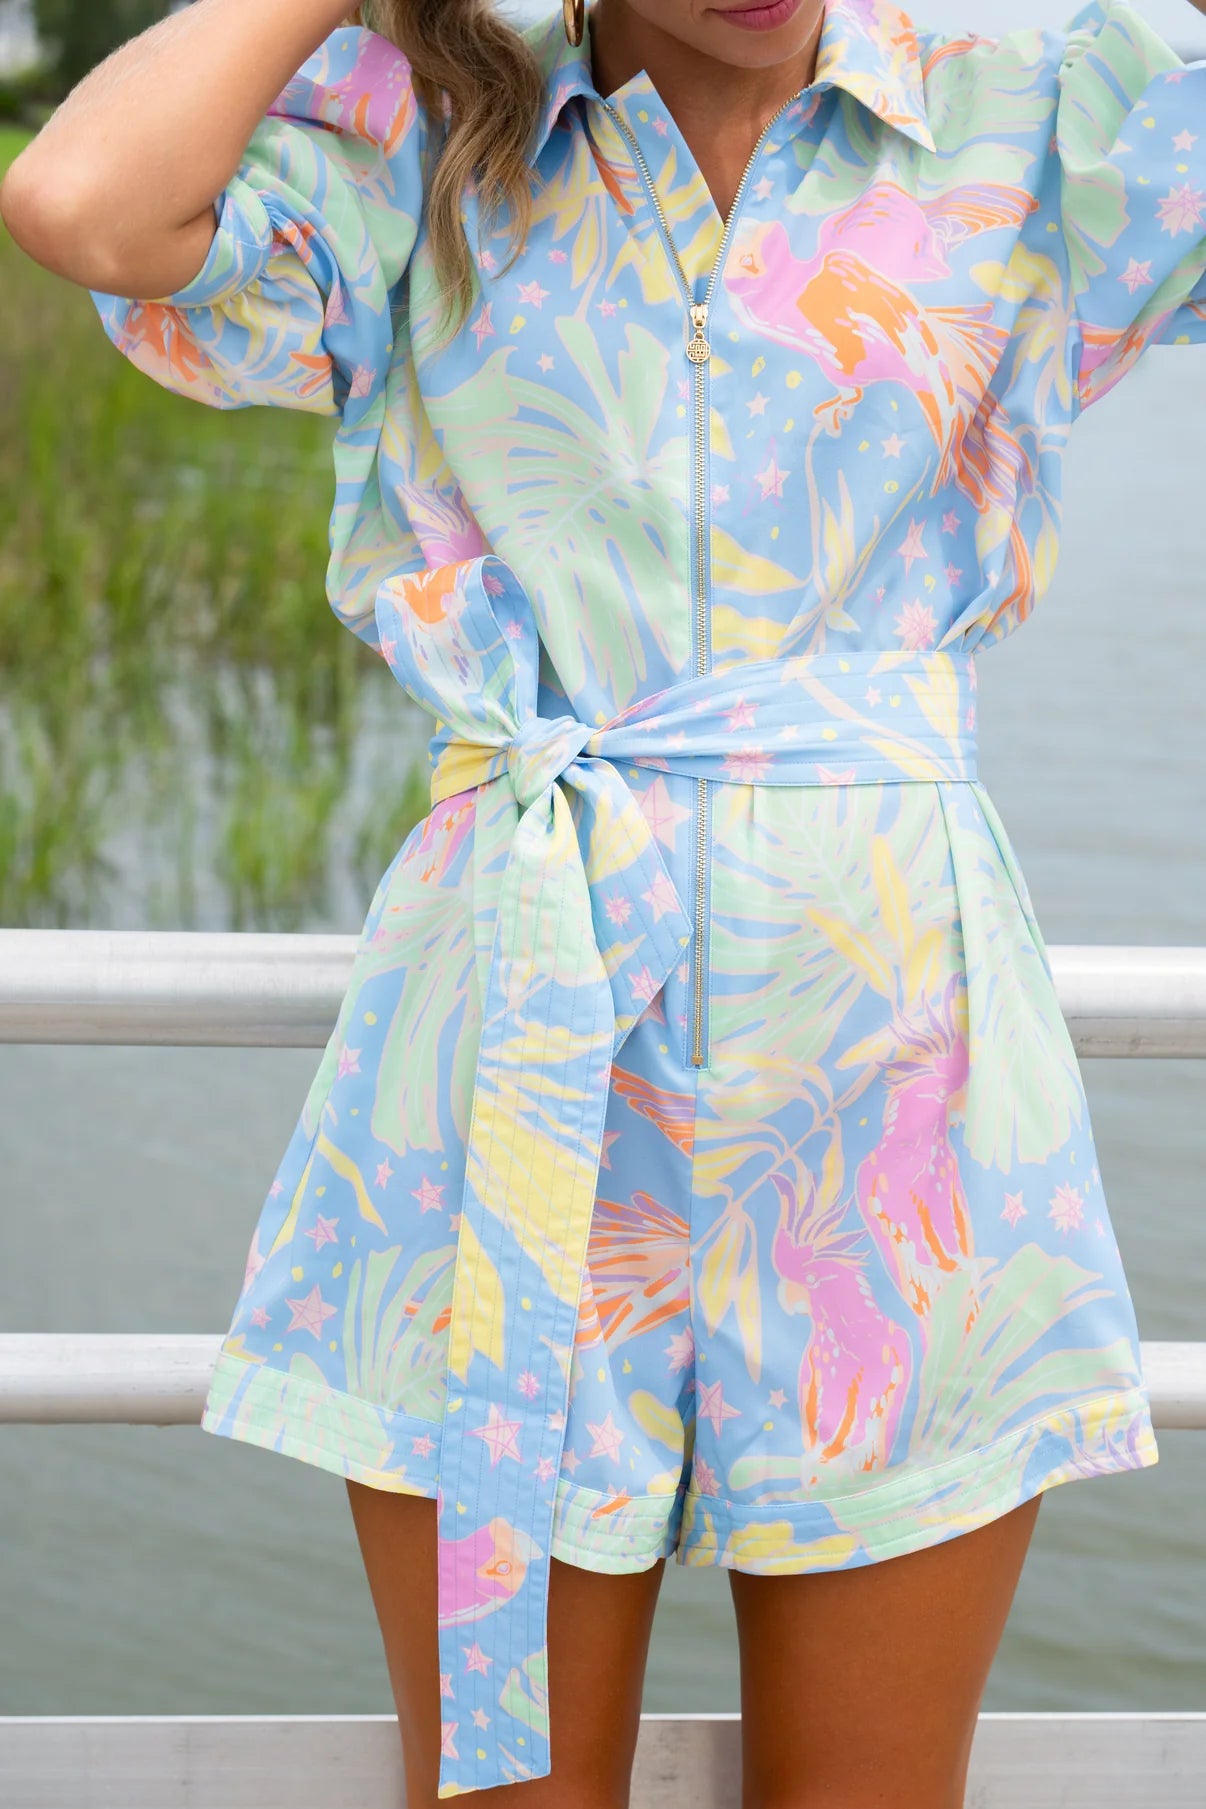 Emily McCarthy Rio Romper - Parrot Party